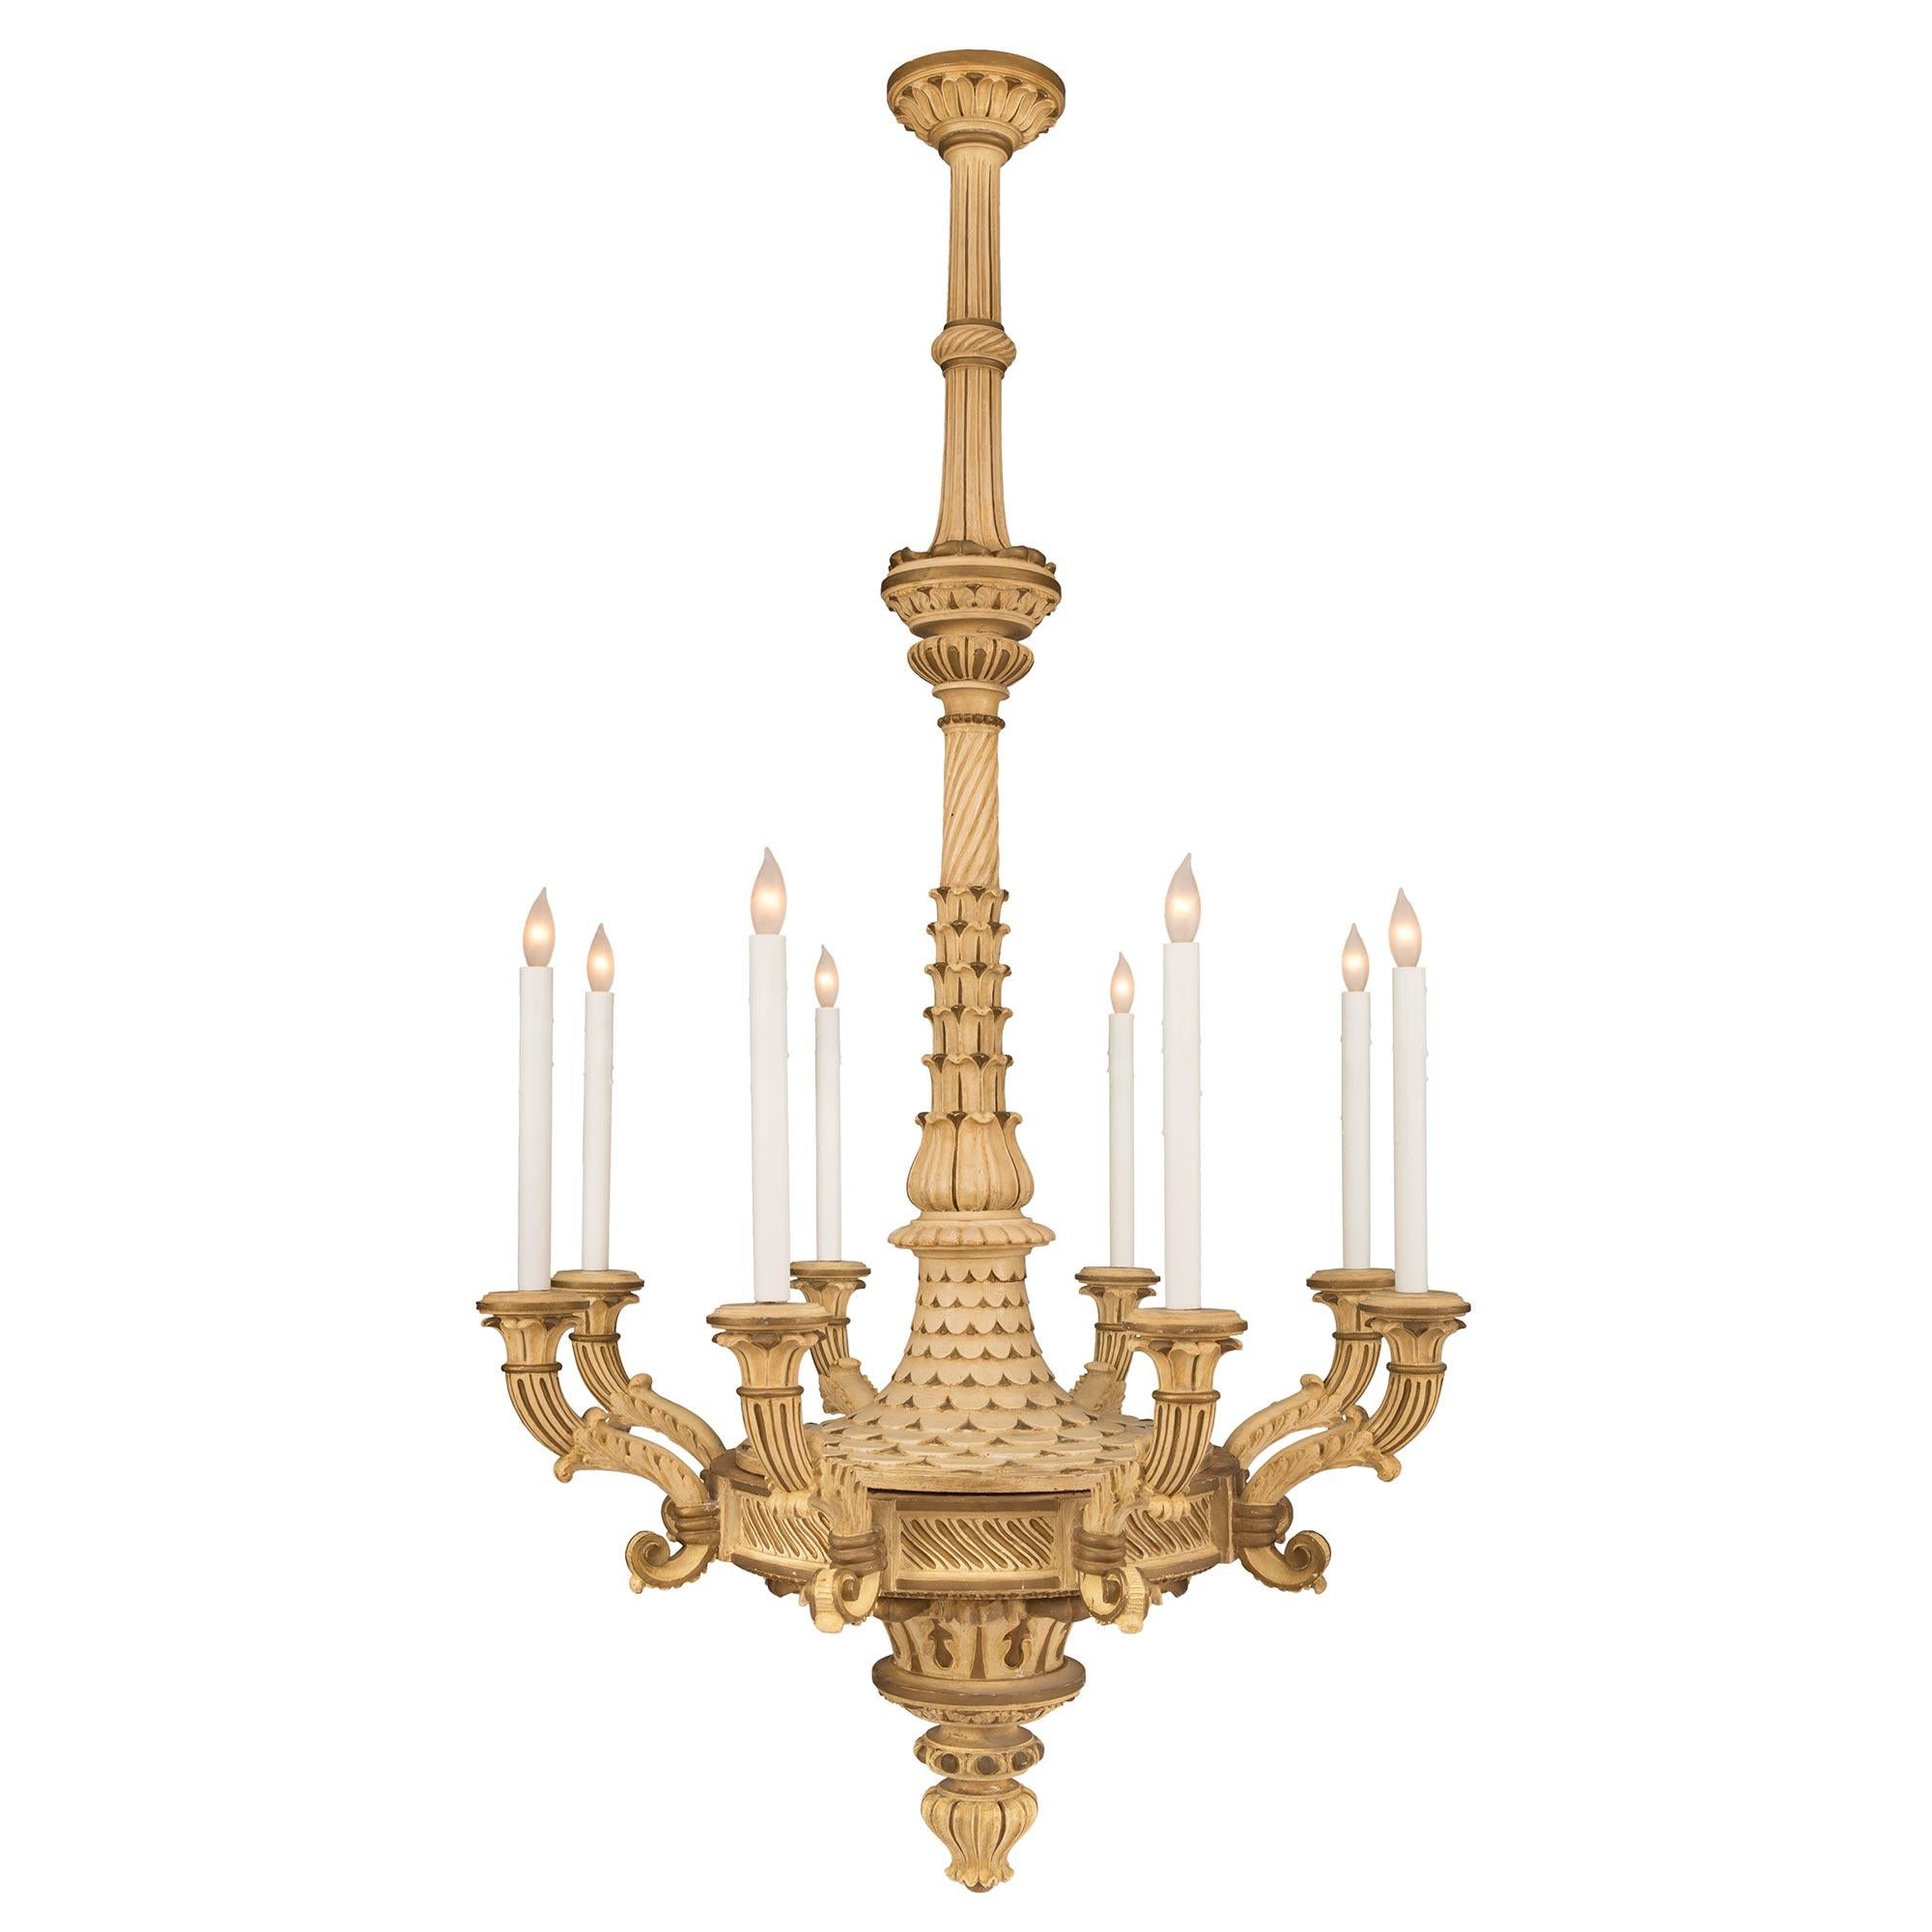 A wonderful and most unique Italian 19th century Neo-Classical patinated eight arm chandelier. The chandelier is centered by a lovely foliate bottom inverted finial below striking Les Oves and acanthus leaf movements. Each elegantly scrolled arm